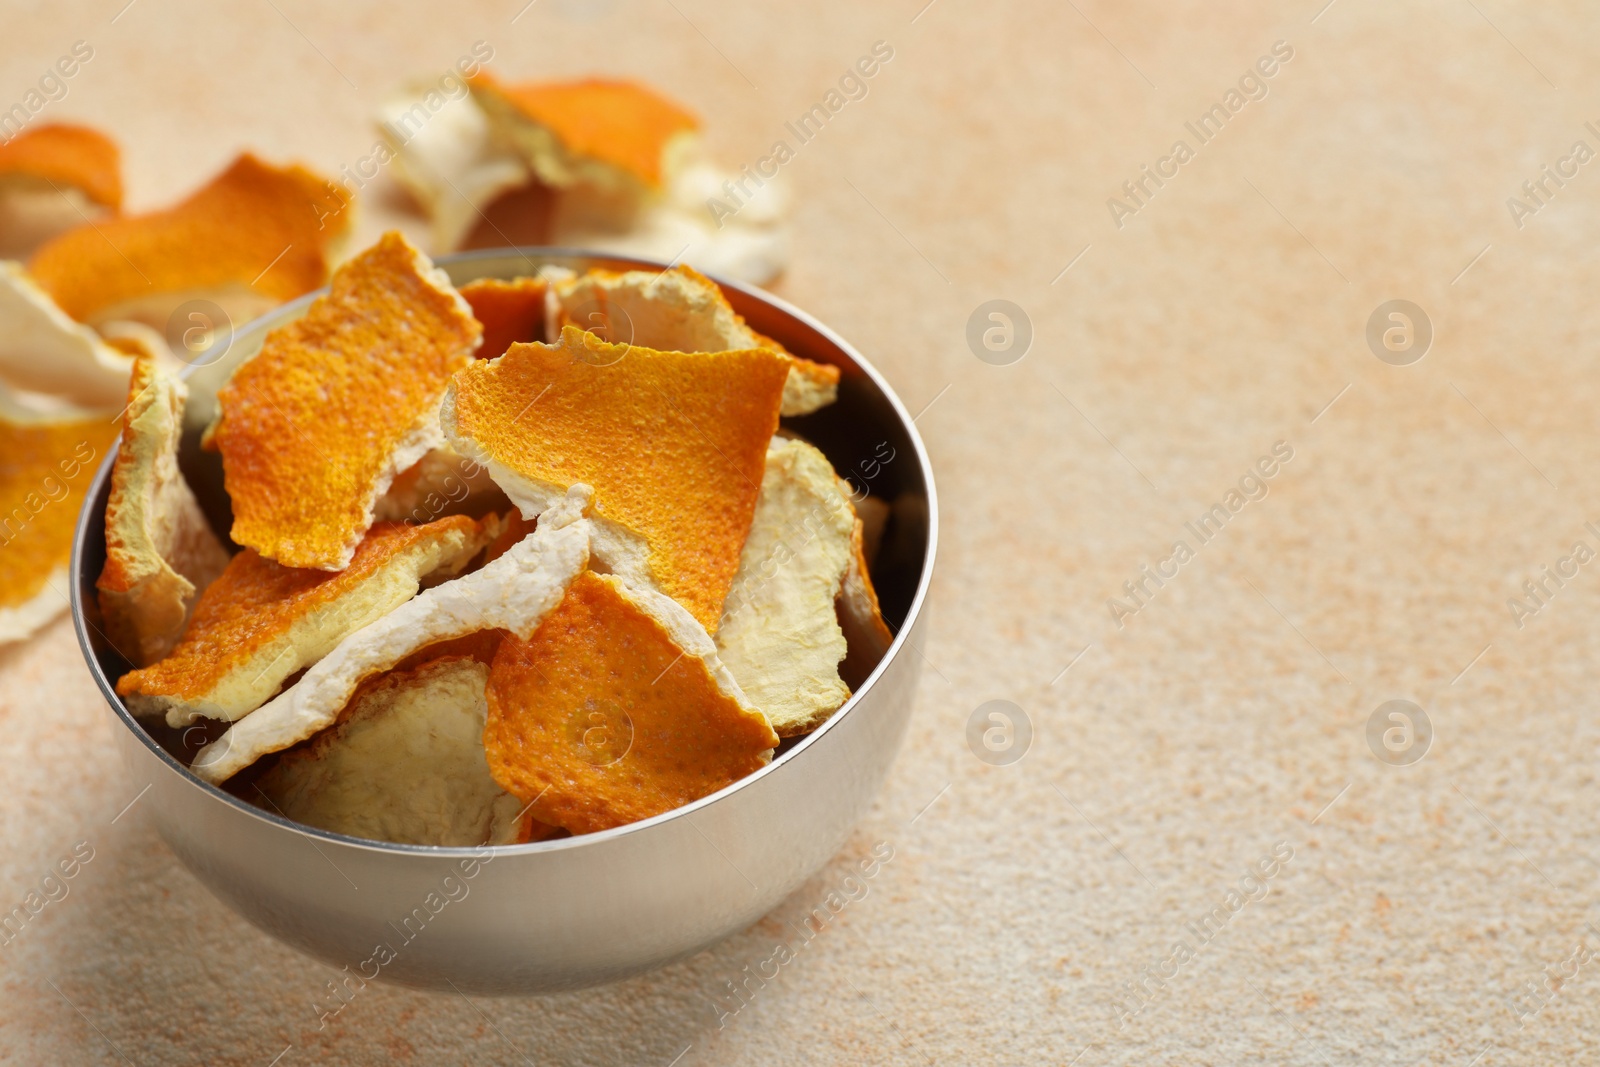 Photo of Dry orange peels in bowl on beige table, space for text